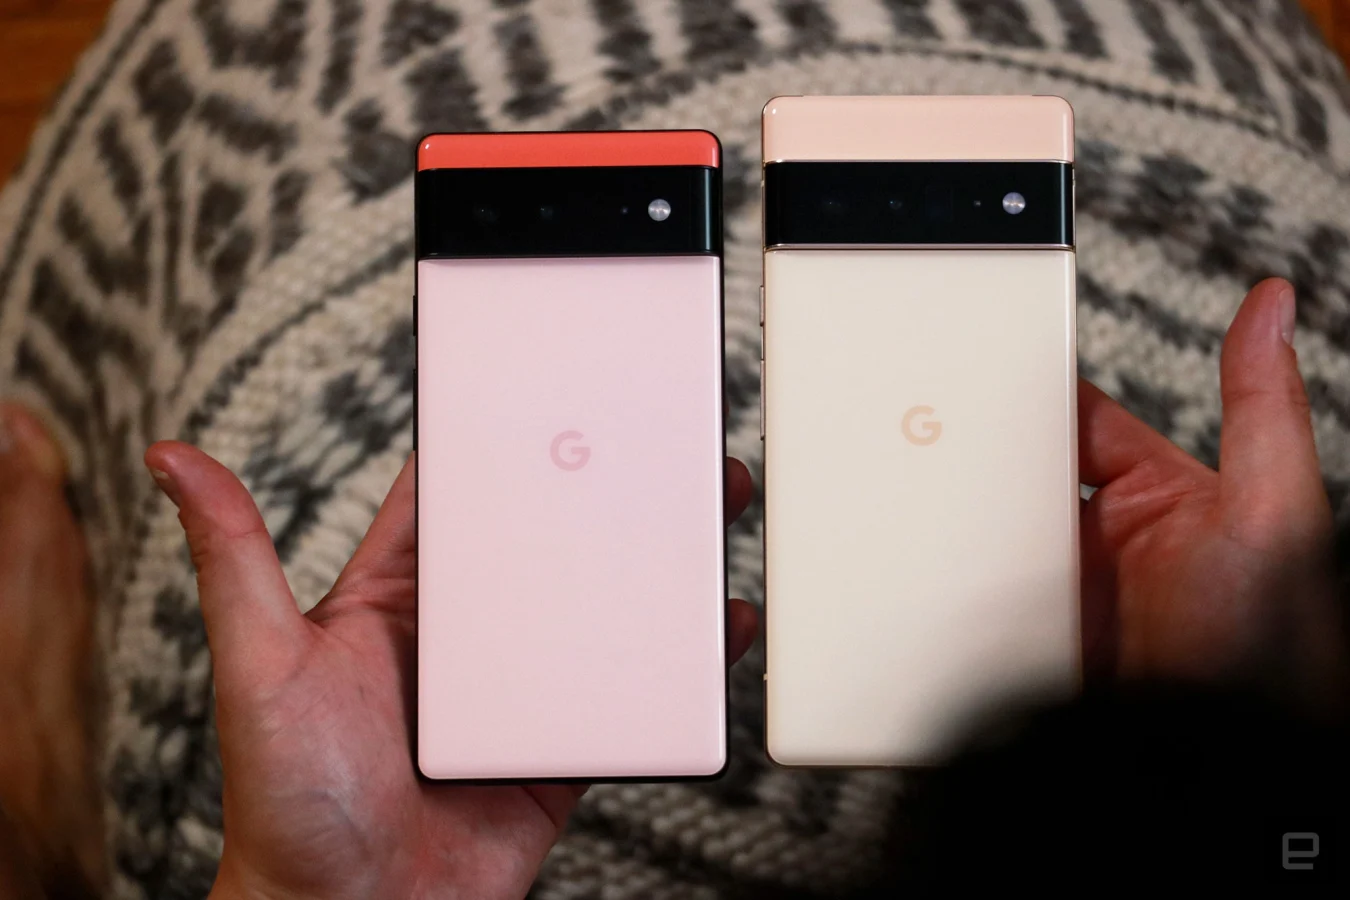 The Pixel 6 and Pixel 6 Pro in coral and blush